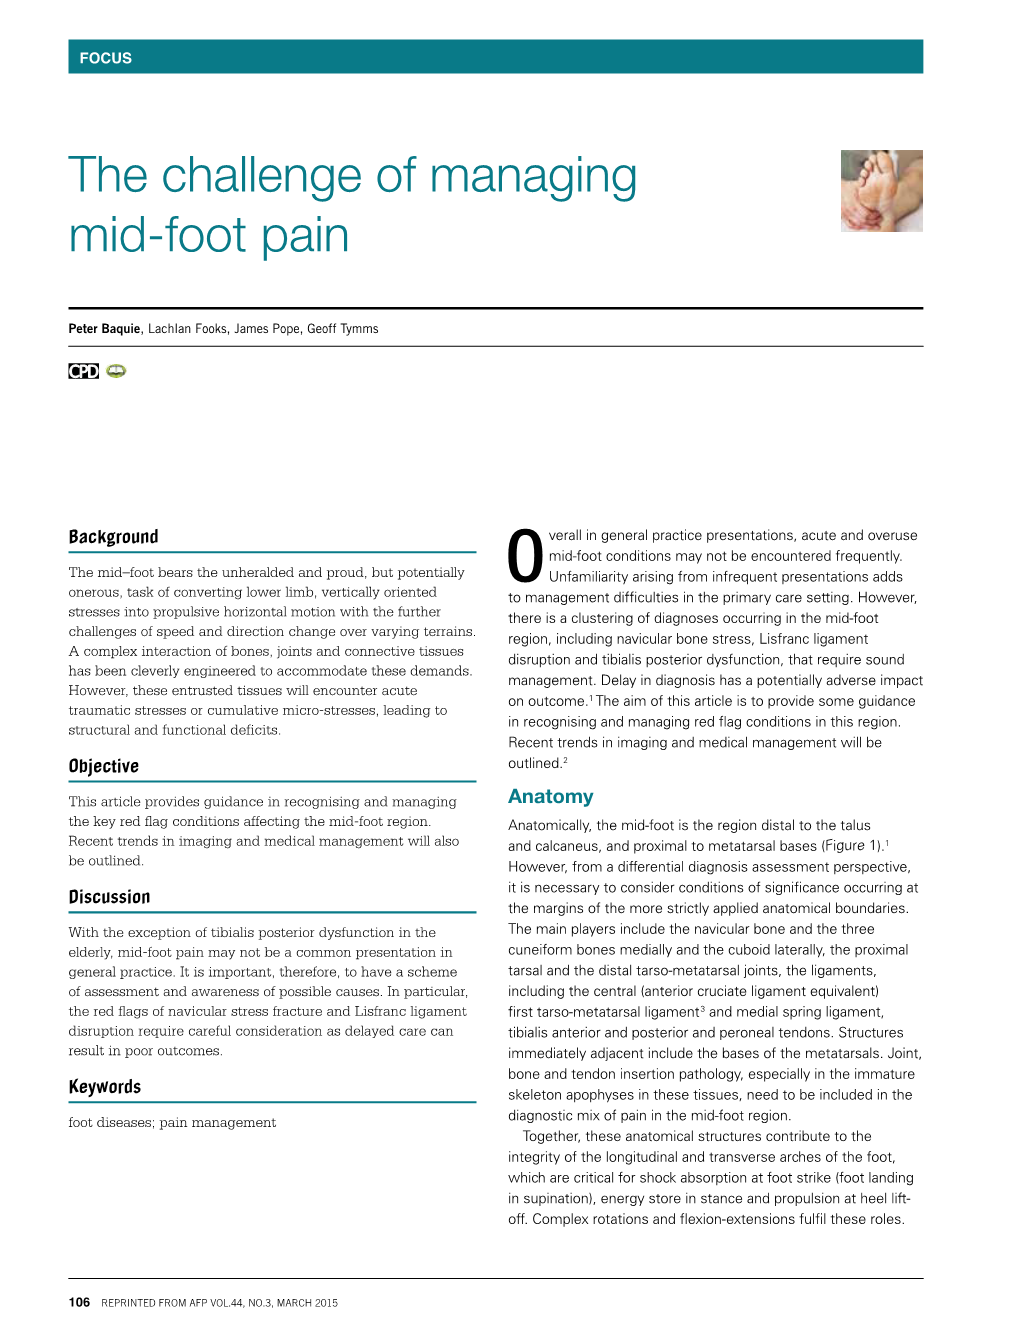 The Challenge of Managing Mid-Foot Pain